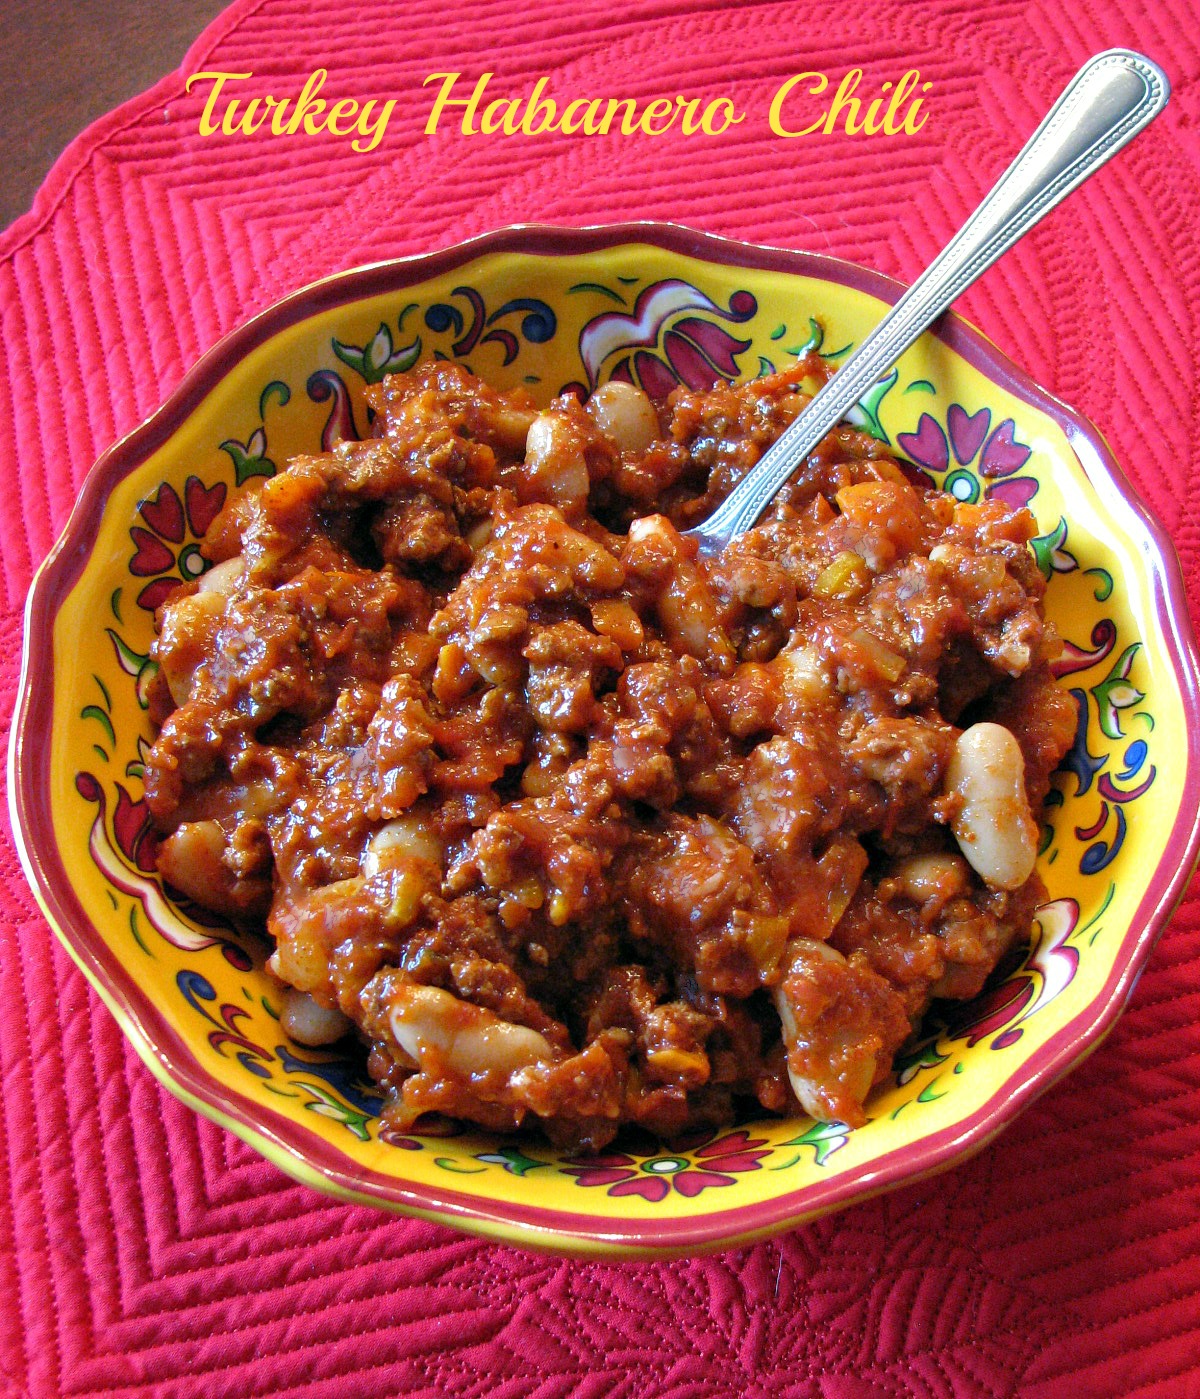 Spicy Turkey Habanero Chili, with the sweetness of crushed tomatoes, healthy vegetables, and cannellini beans, this recipe is for the spice lovers! 